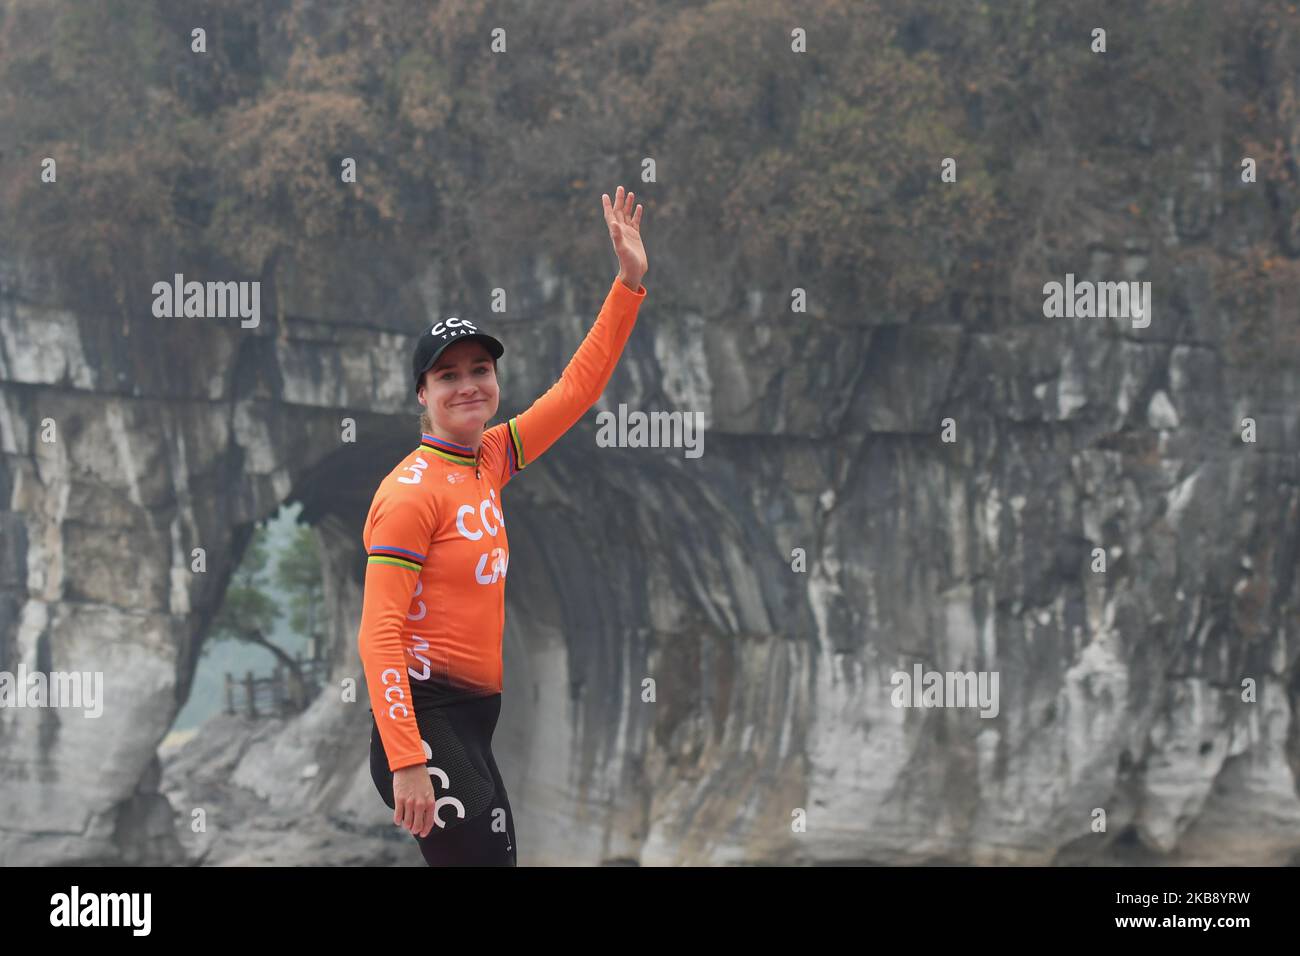 Marianne Vos of Netherlands and Team CCC Liv, seen during the Cycling Tour de Guangxi 2019 Awards Ceremony, as she wins 2019 Women's WorldTour. On Tuesday, October 22, 2019, in Guilin, Guangxi Region, China. (Photo by Artur Widak/NurPhoto) Stock Photo